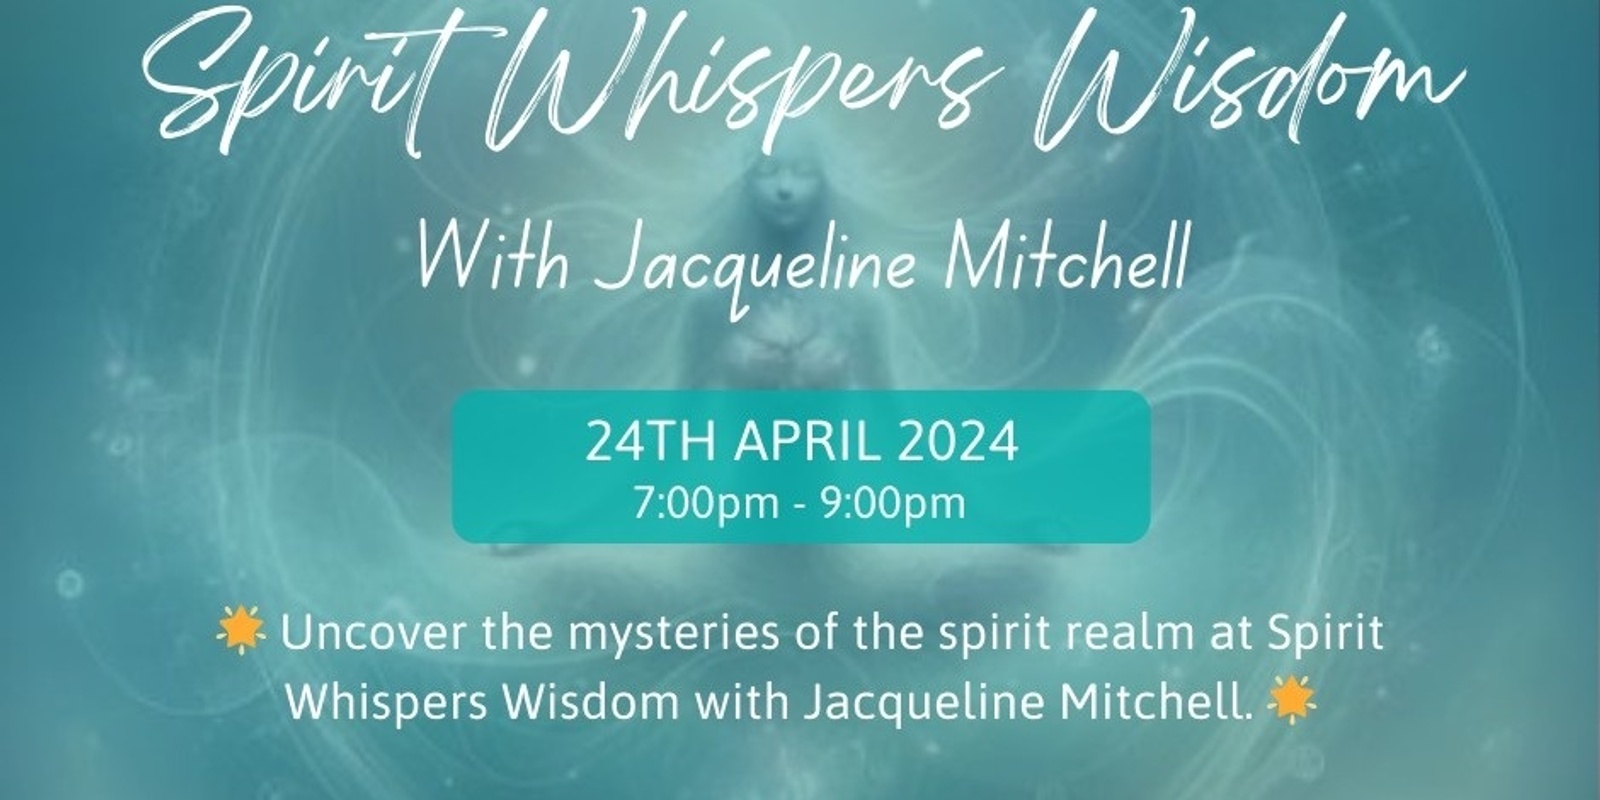 Banner image for Spirit Whispers Wisdom (Channelled Wisdom) with Jacqueline Mitchell